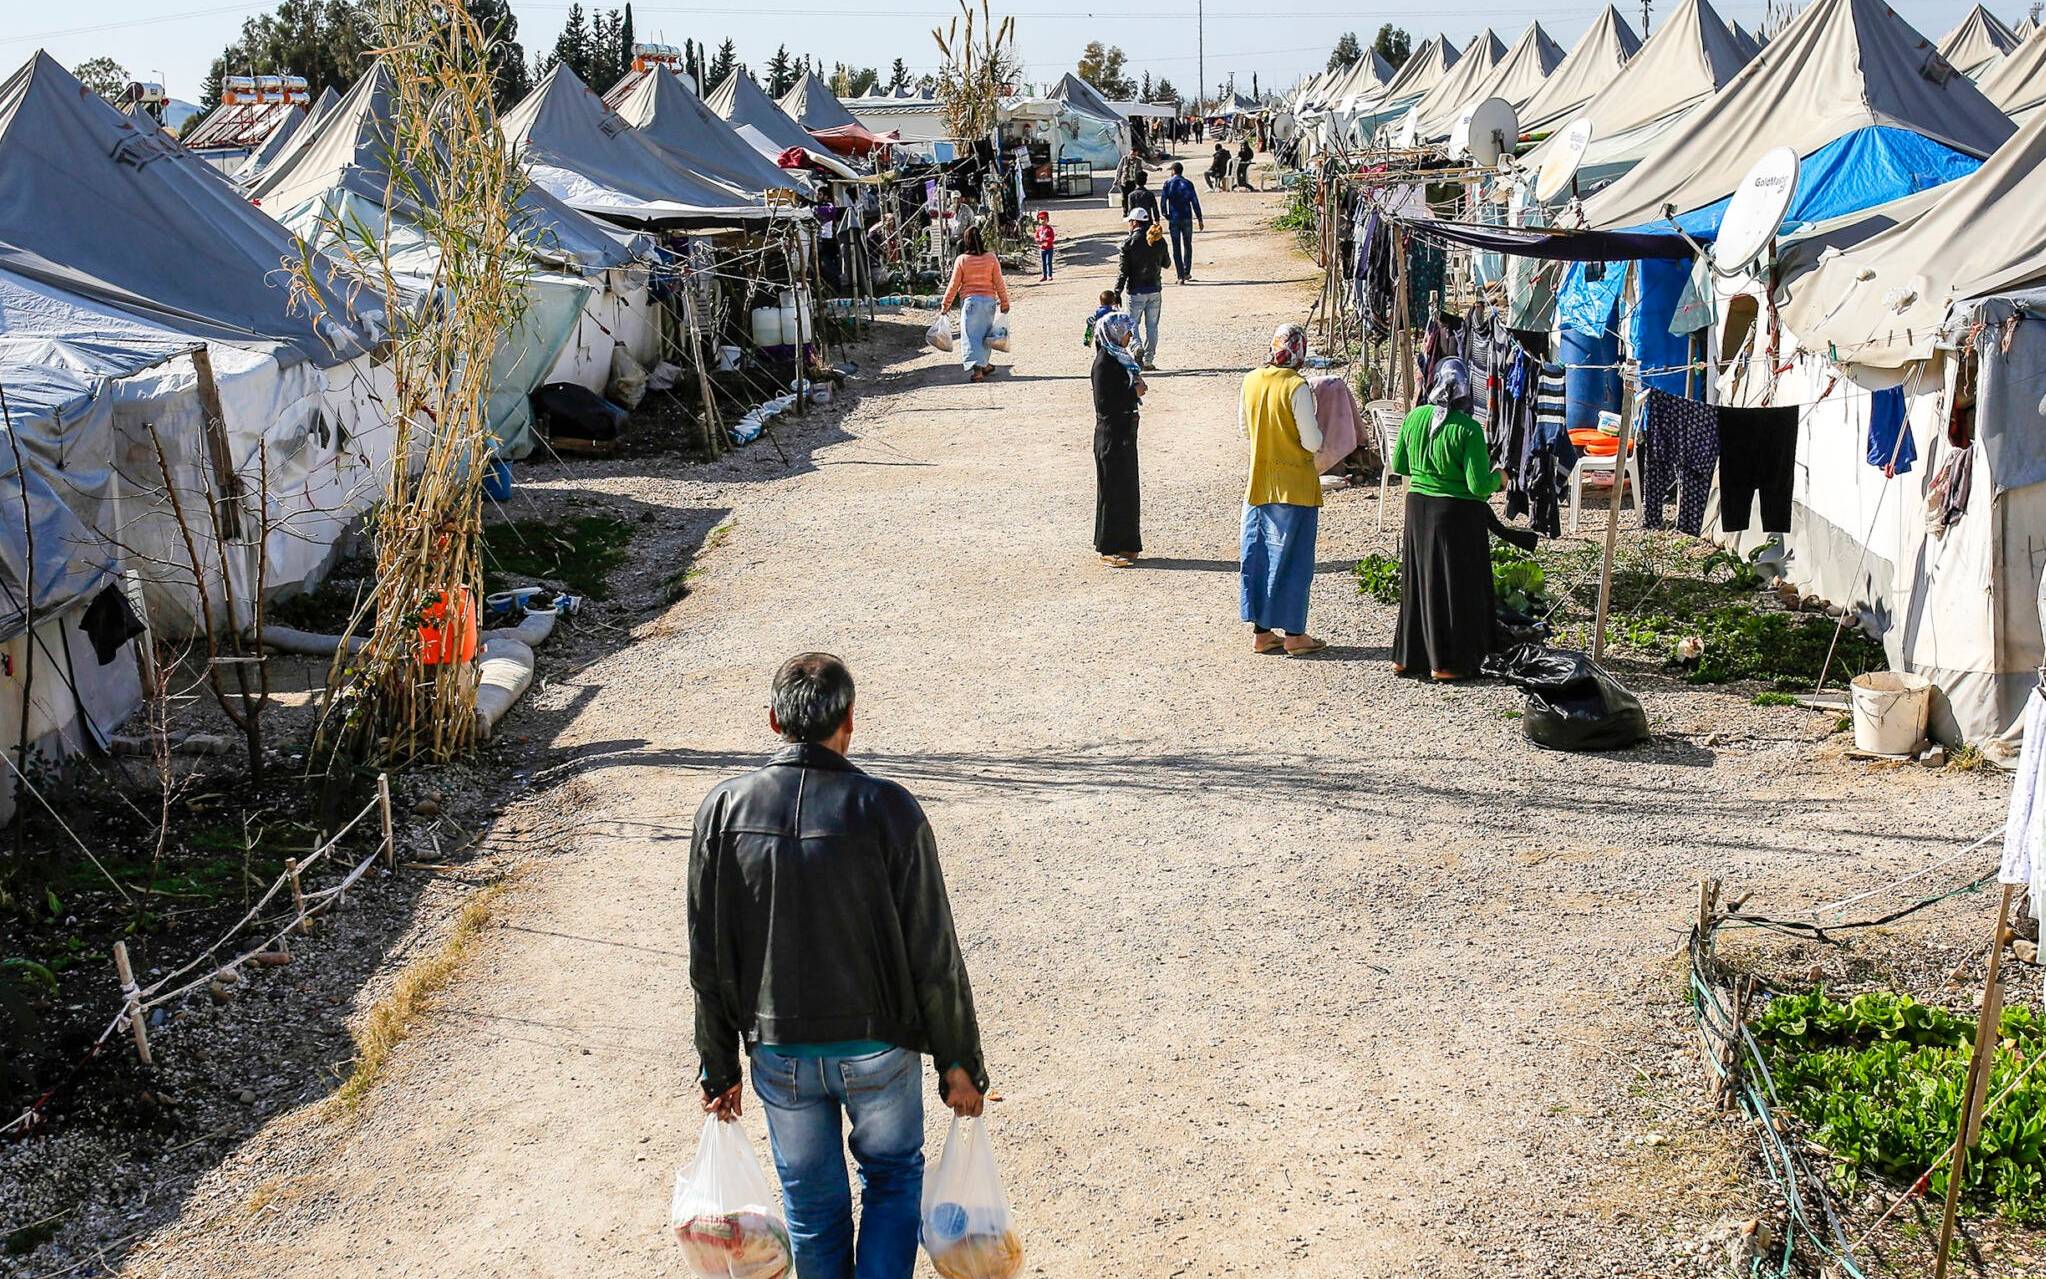 General view of the Osmaniye Cevdetiye Camp, in Turkey on 10th of February, 2016 during a visit by the BUG - Committee on Budgets Delegation of the European Parliament.